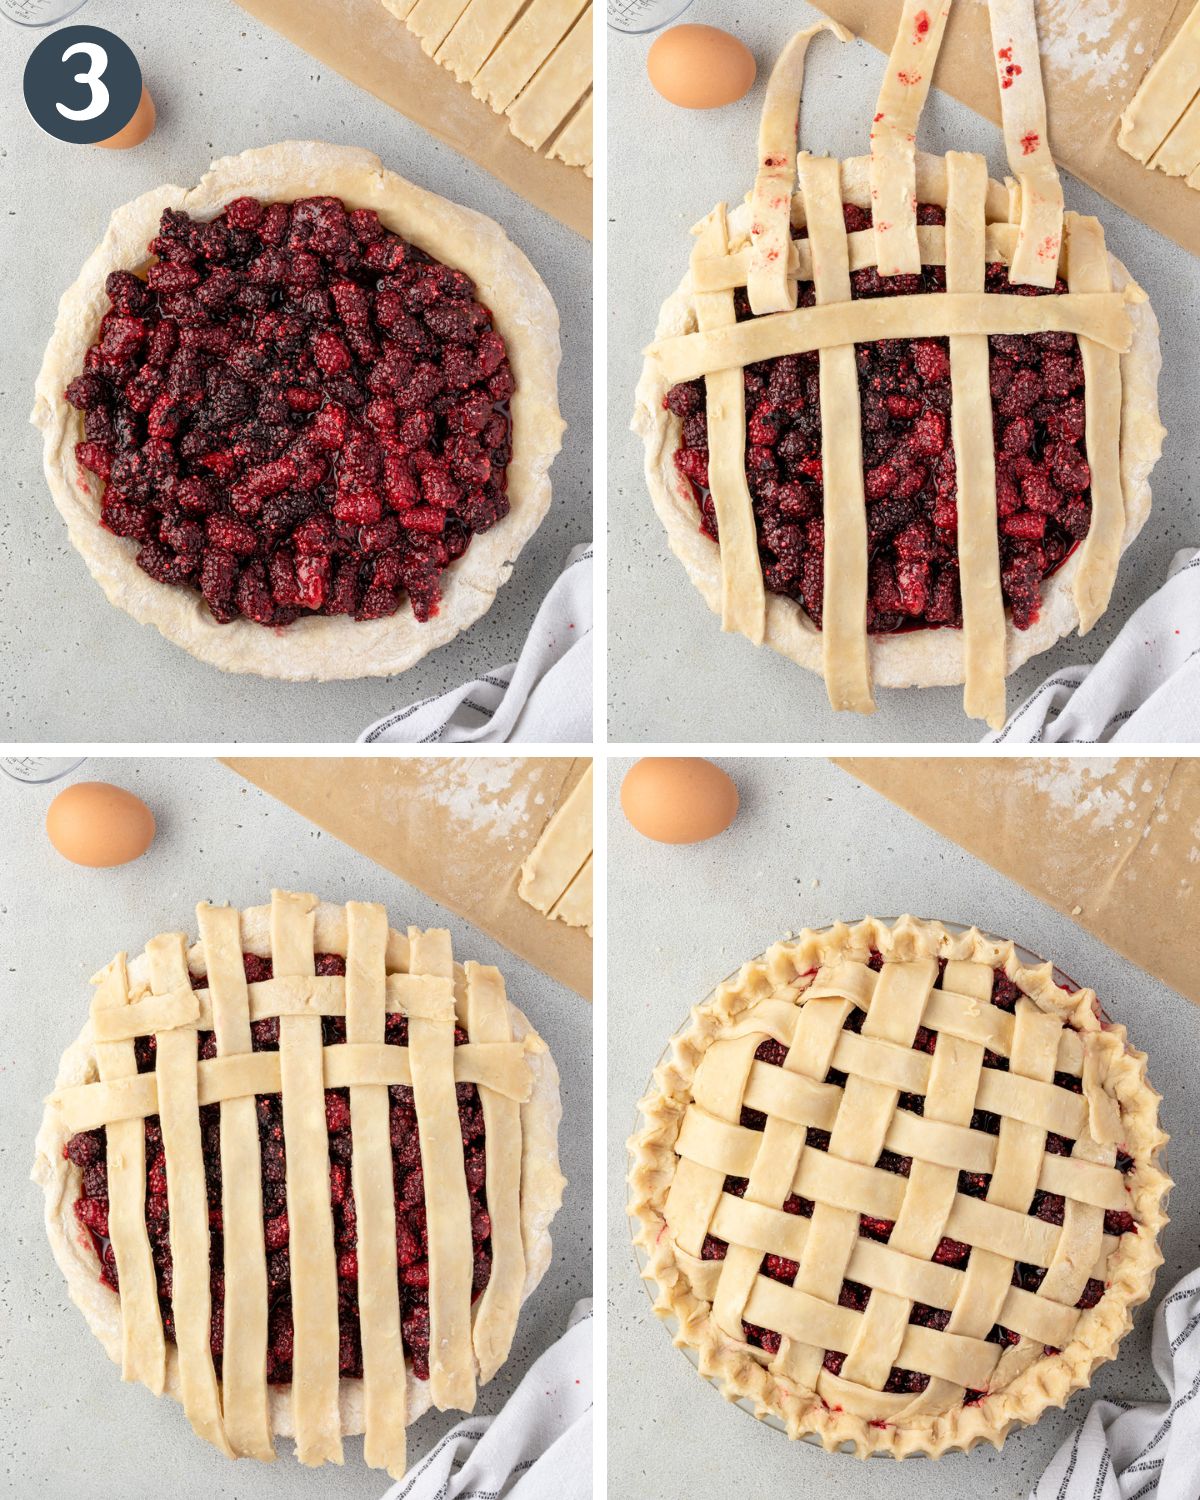 4 images showing the steps to lattice pie crust, lifting every other strip in one direction and laying down a strip in the other direction.